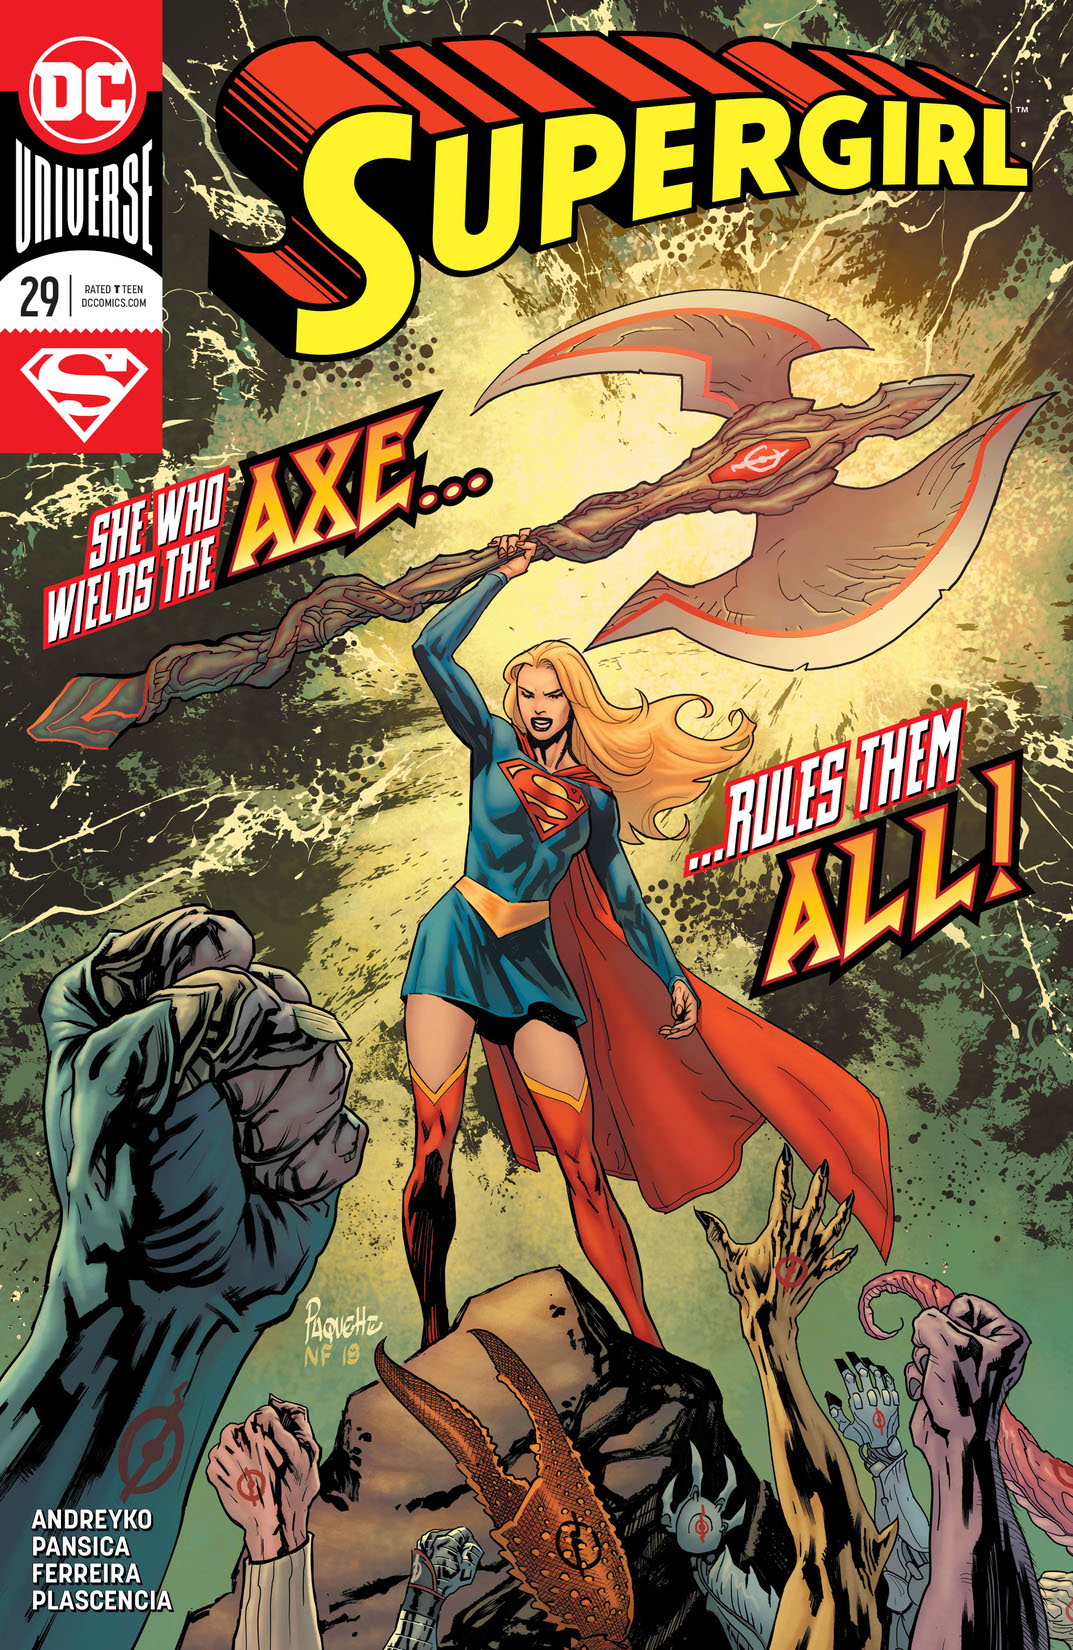 Supergirl (2016-) #29 preview images